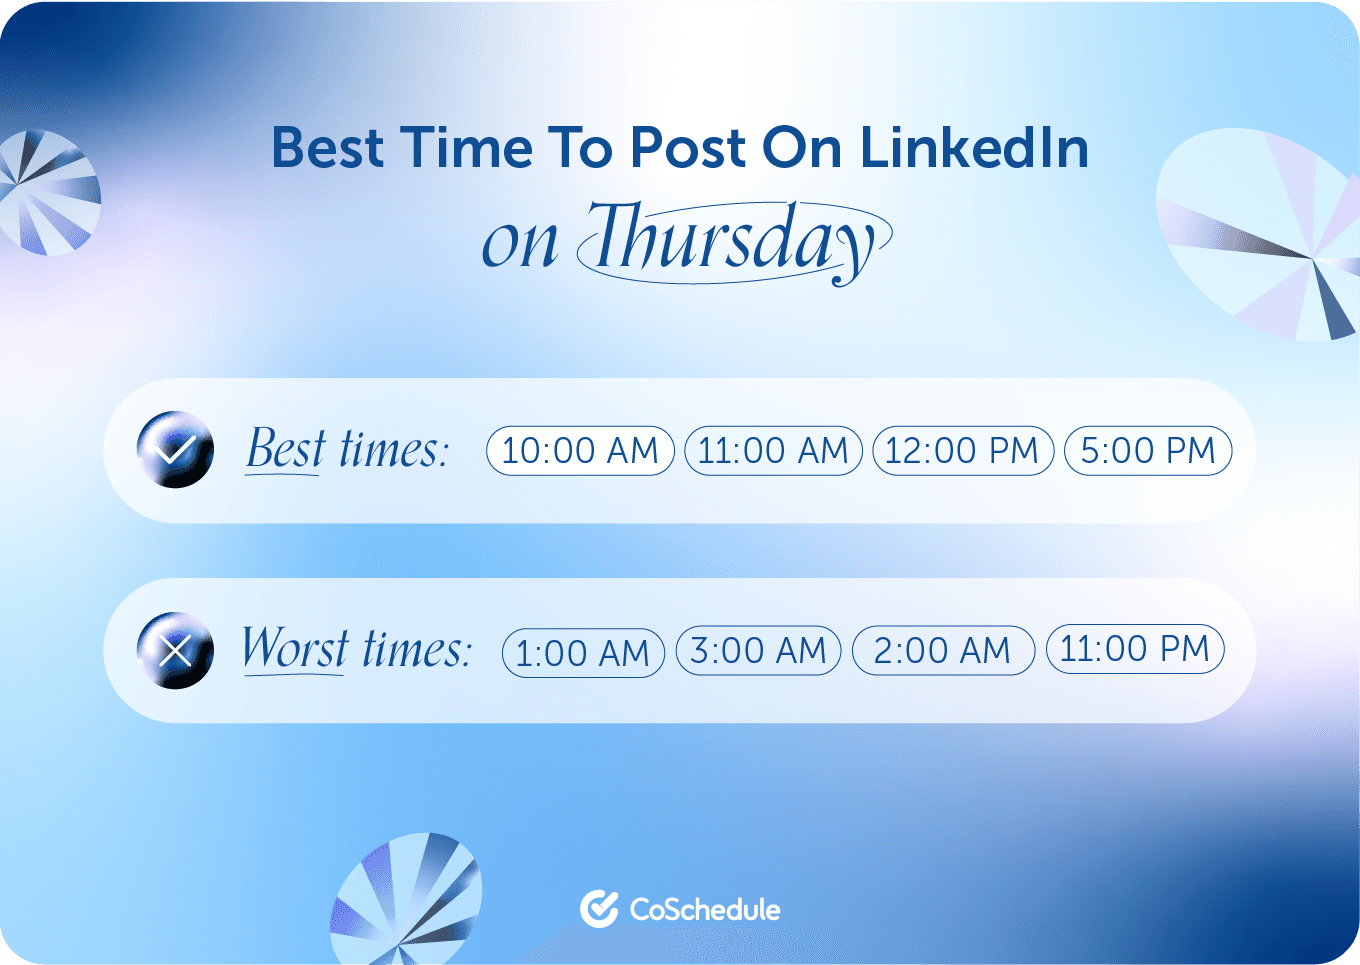 CoSchedule graphic on the best times to post on LinkedIn Thursday